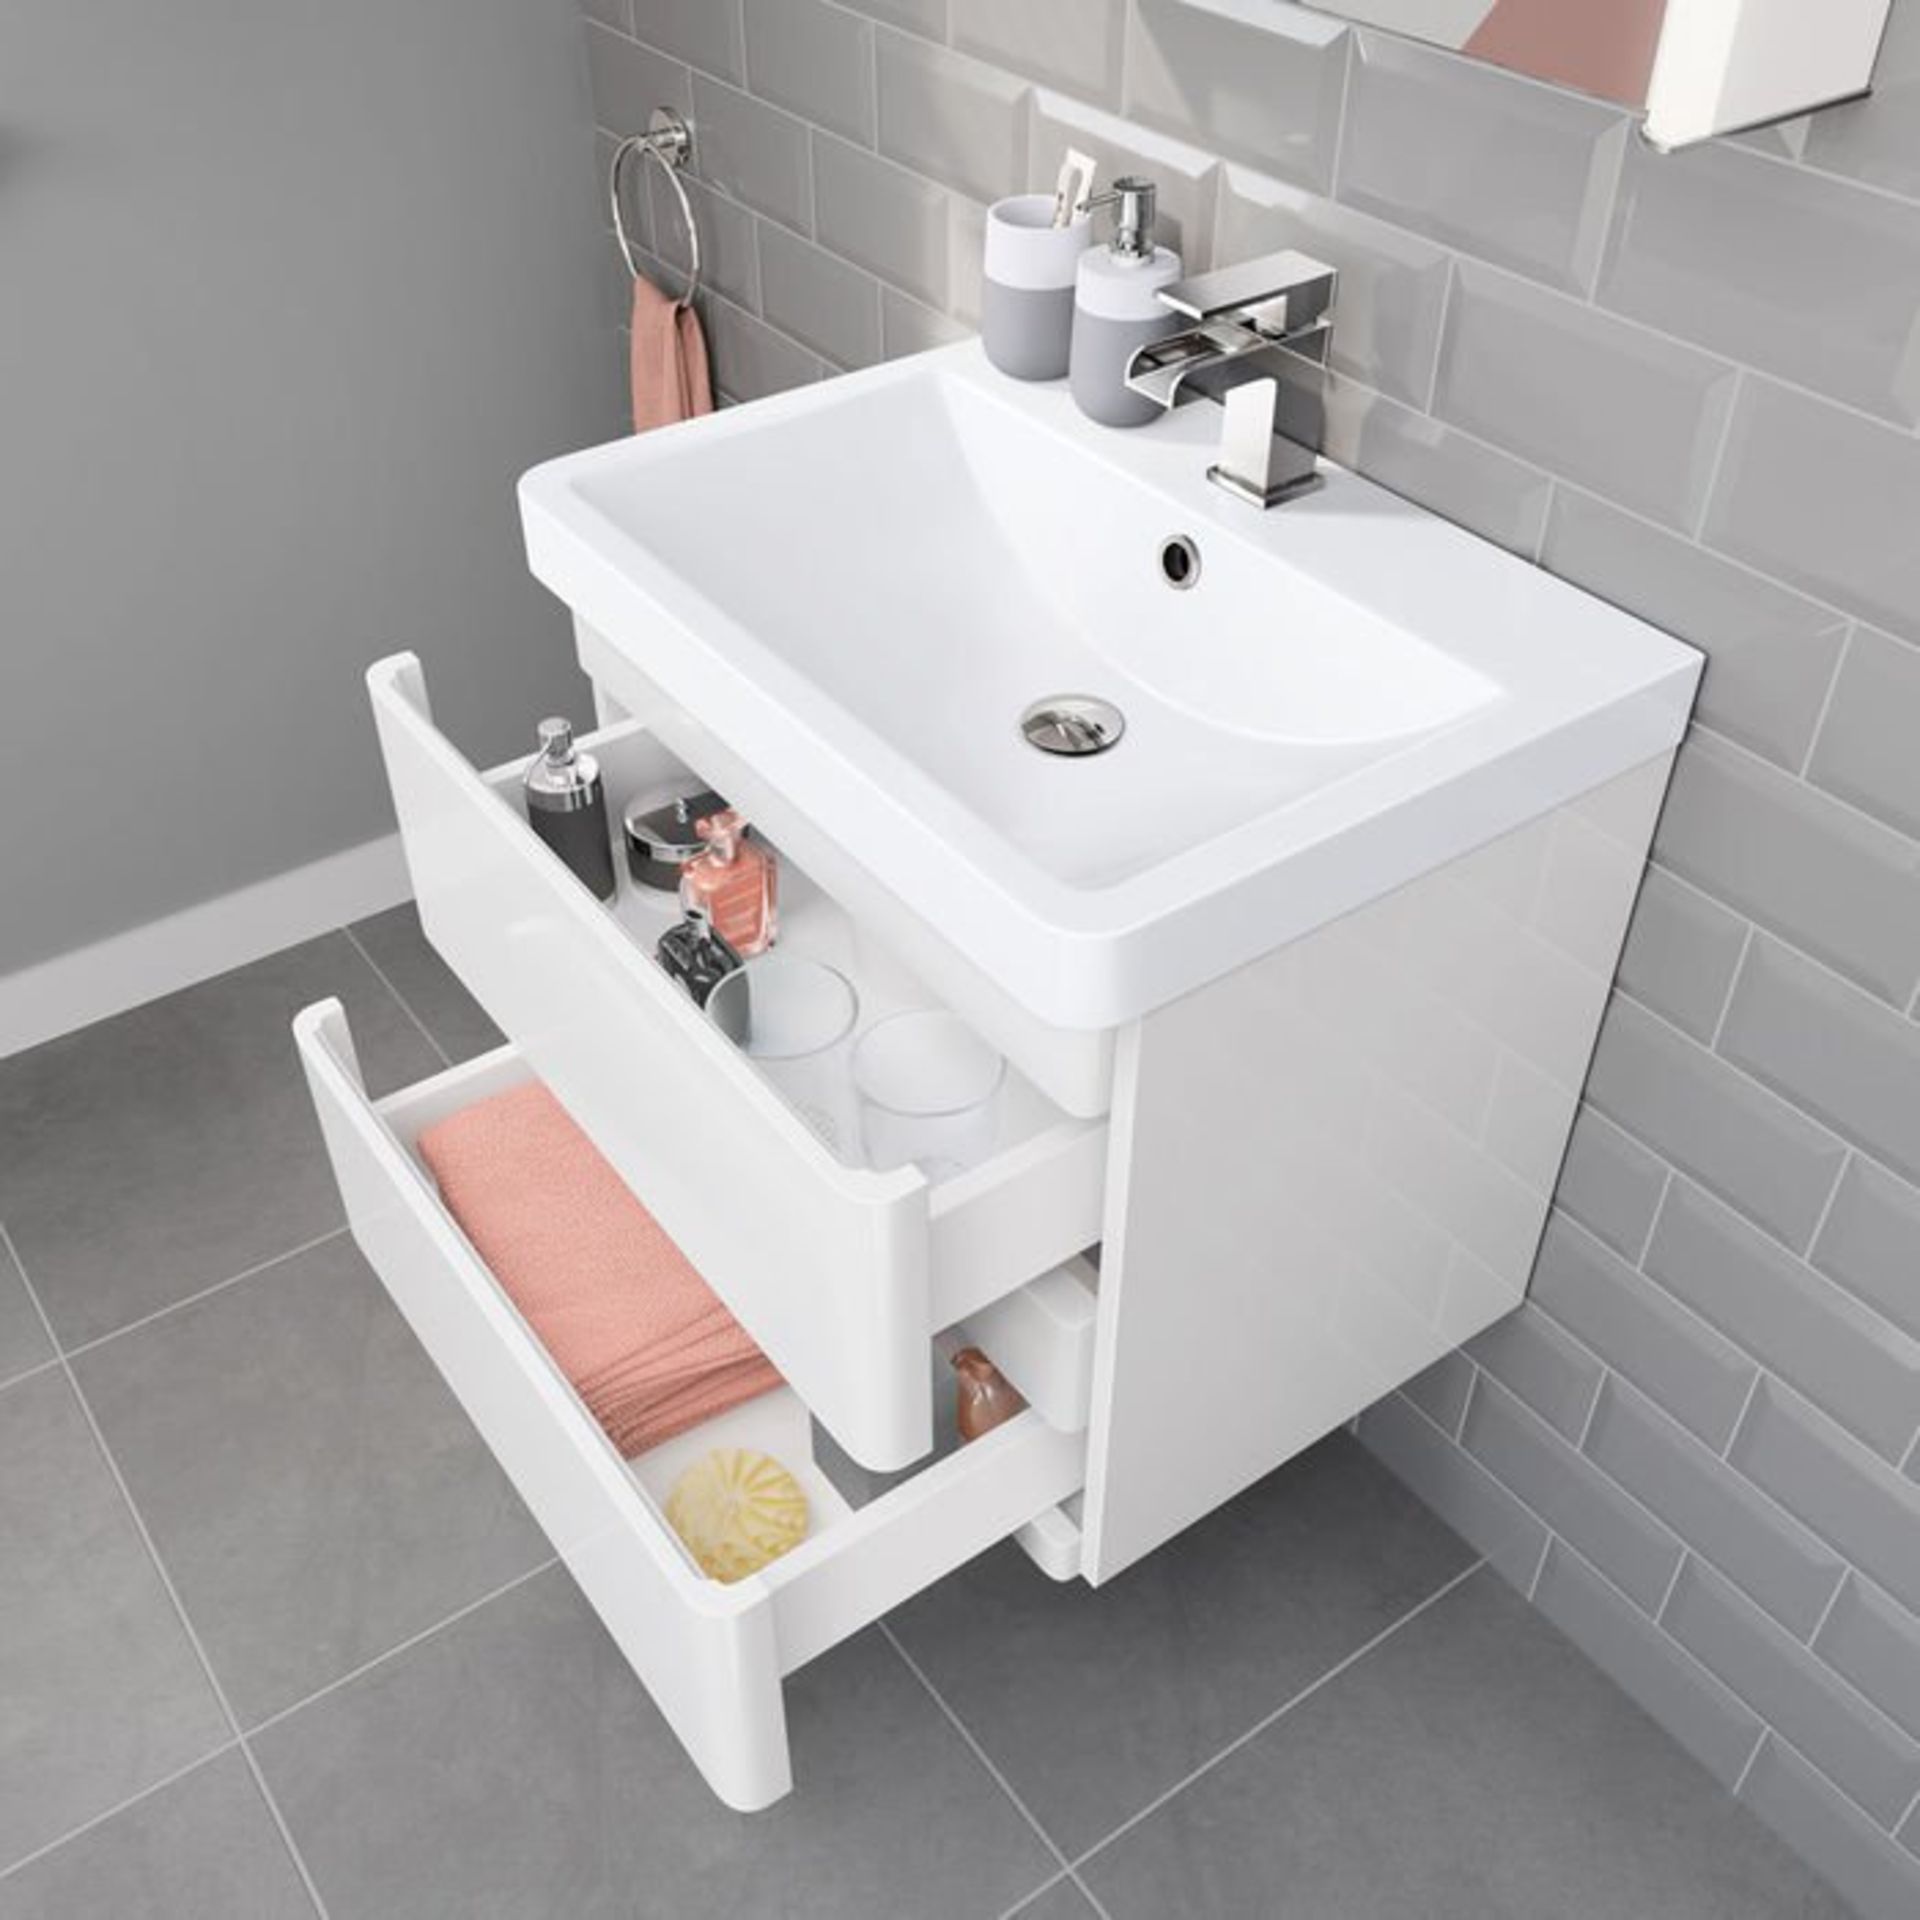 (M4) 600mm Denver II Gloss White Built In Basin Drawer Unit - Wall Hung. RRP £499.99. COMES COMPLETE - Image 2 of 5